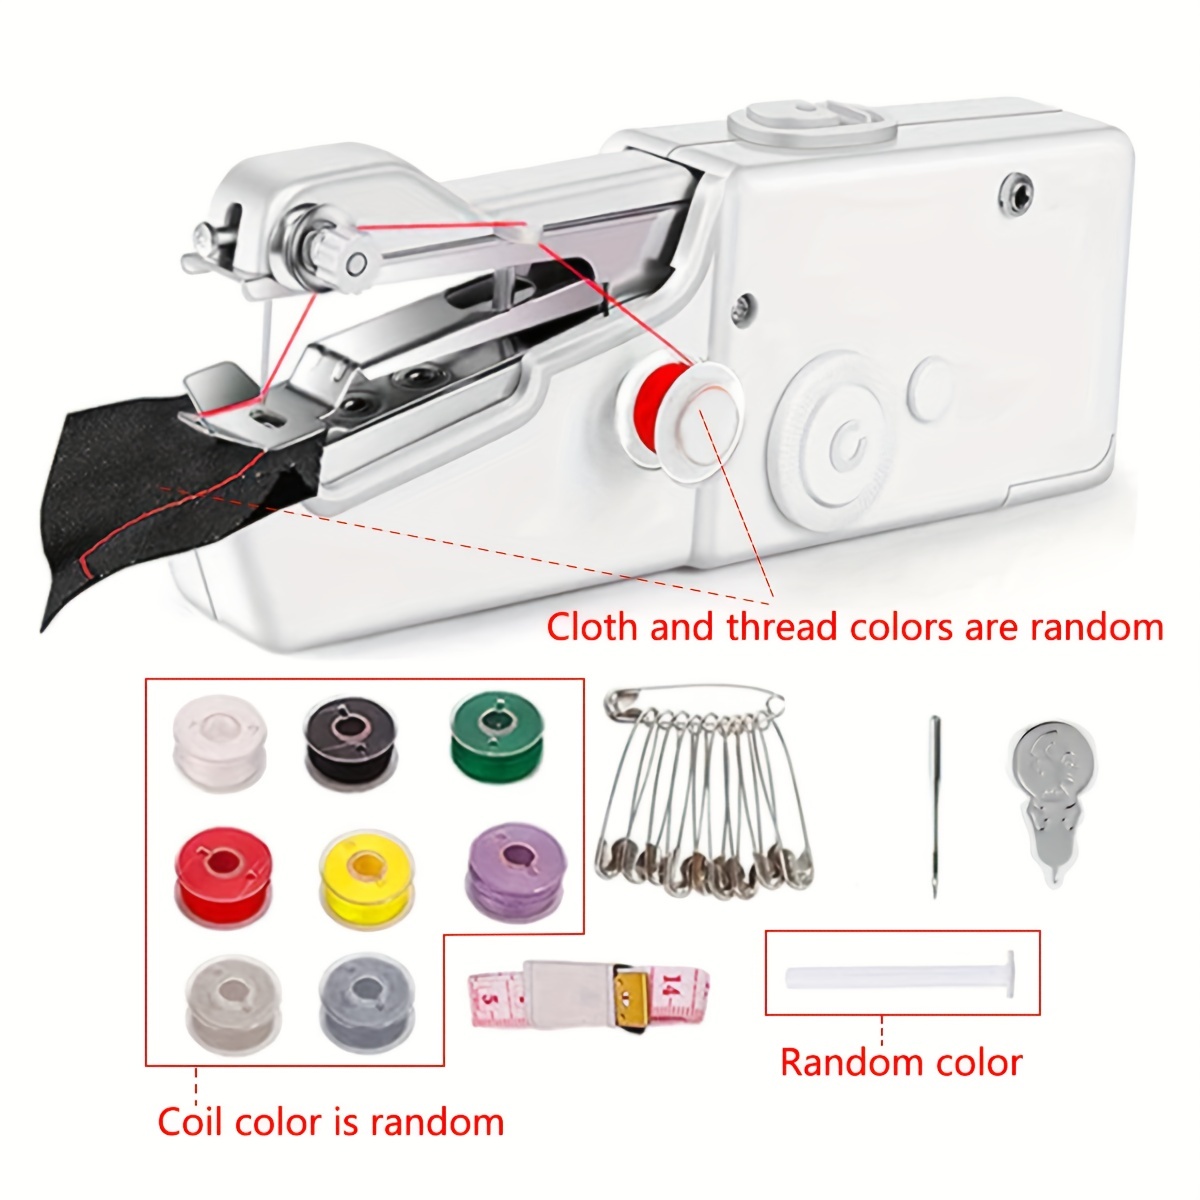 Hand Sewing Machine Portable, Hand Held Sewing Machine Portable, Easy To  Use And Fast Stitching, Sewing Machine For Beginners Suitable For Clothing